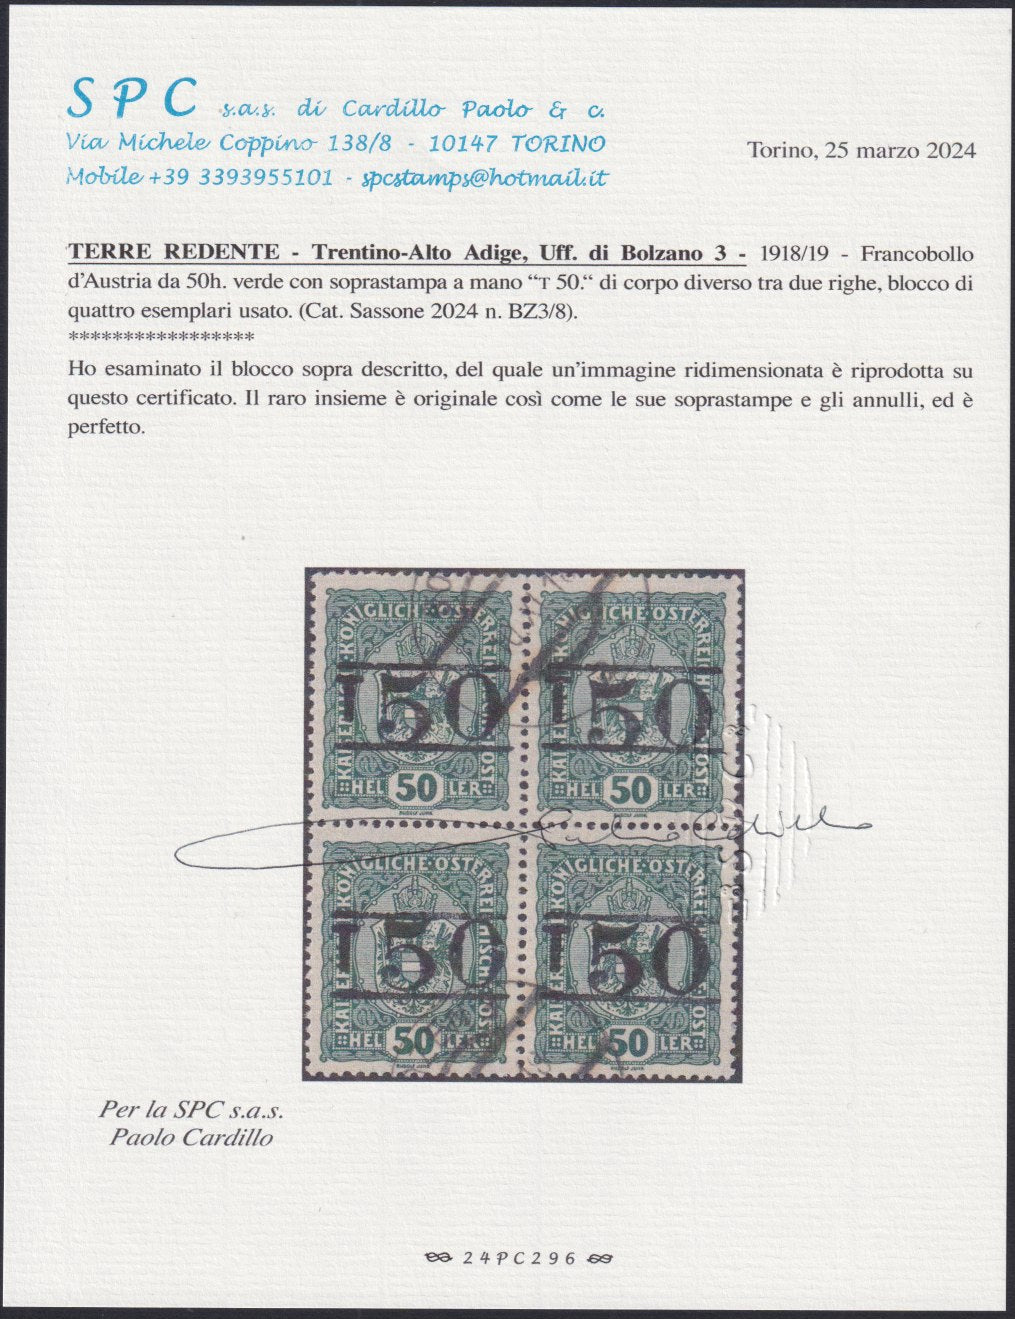 BZ19 - 1918/19 - Trentino Alto Adige, Bolzano office 3, green 50 heller Austrian stamp with overprint "T + larger body digit between two lines", used block of four copies (BZ3/8)